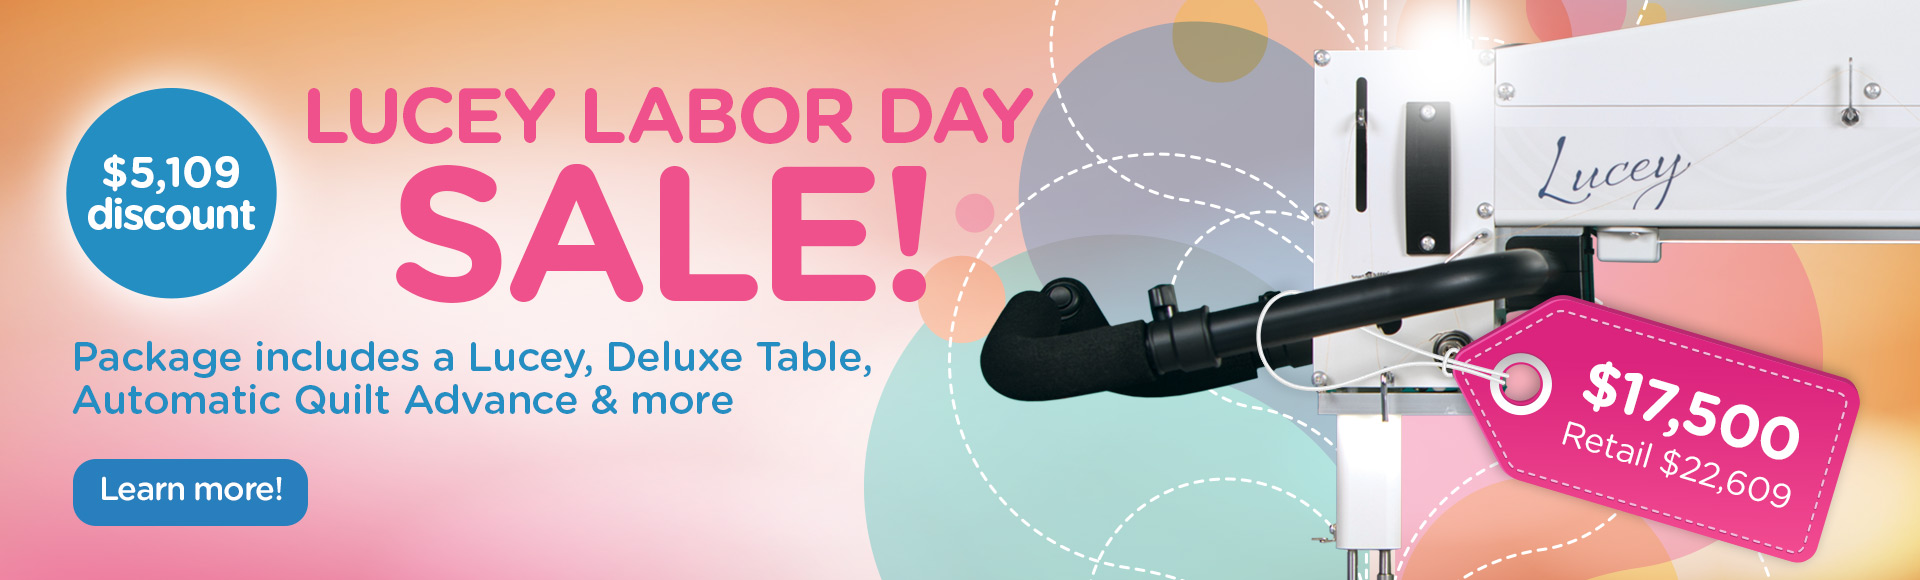 lucey labor day sale